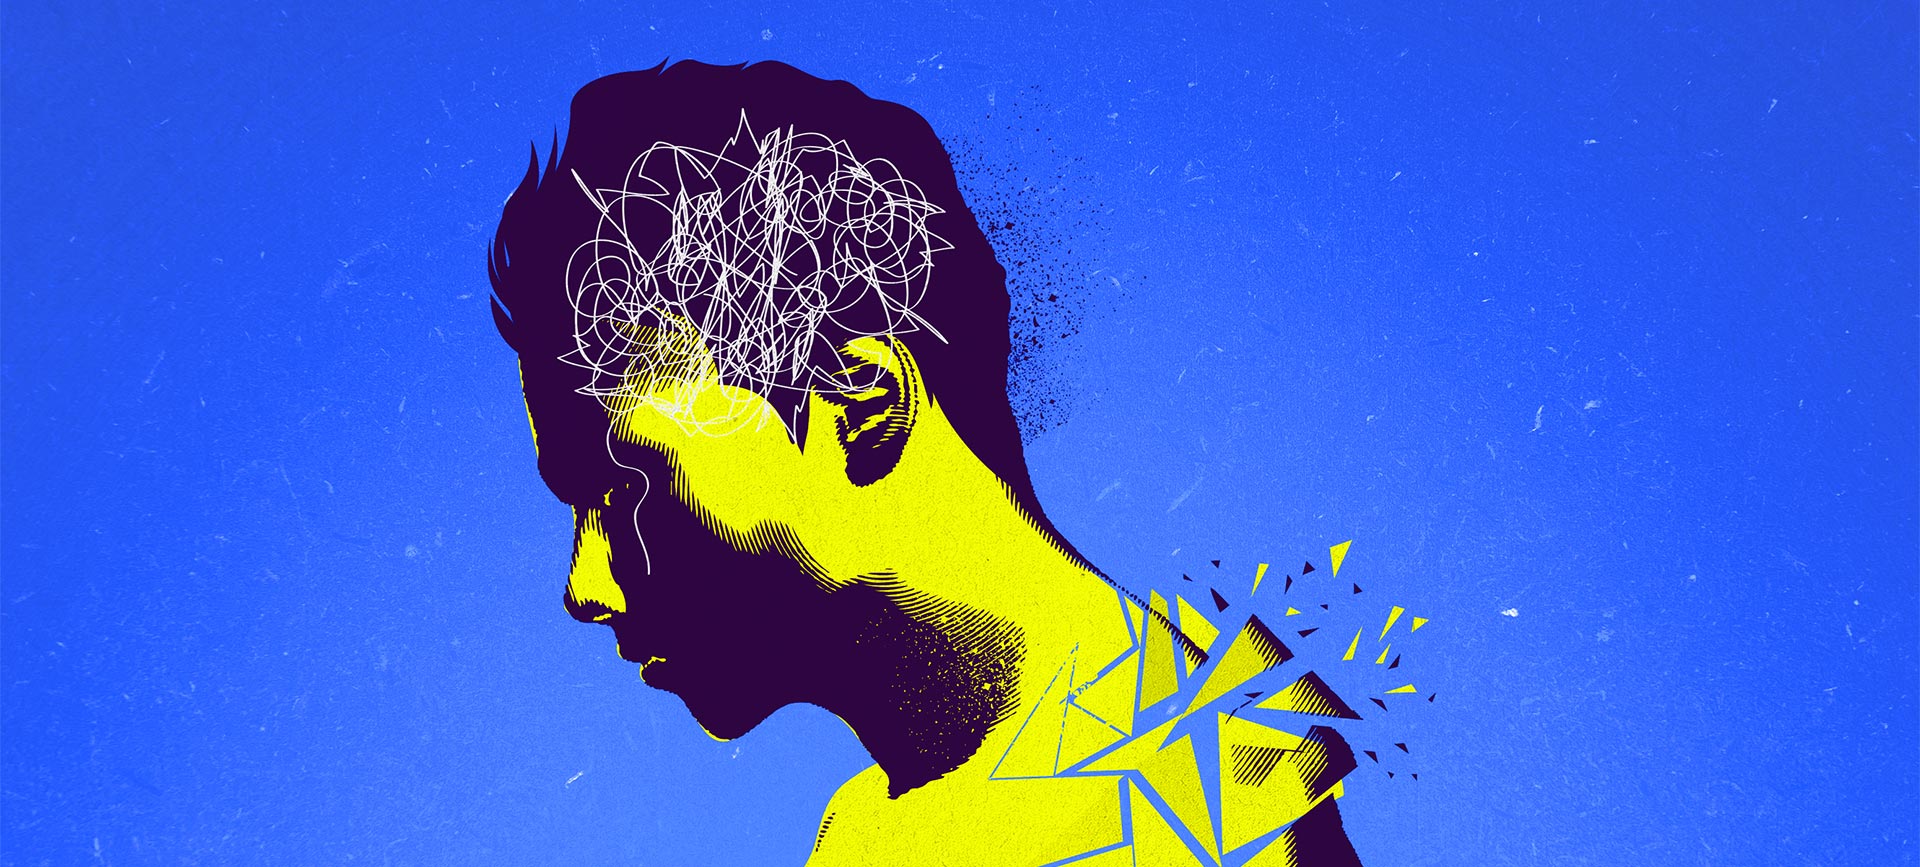 yellow man shattering with white scribbles on his head on a blue background